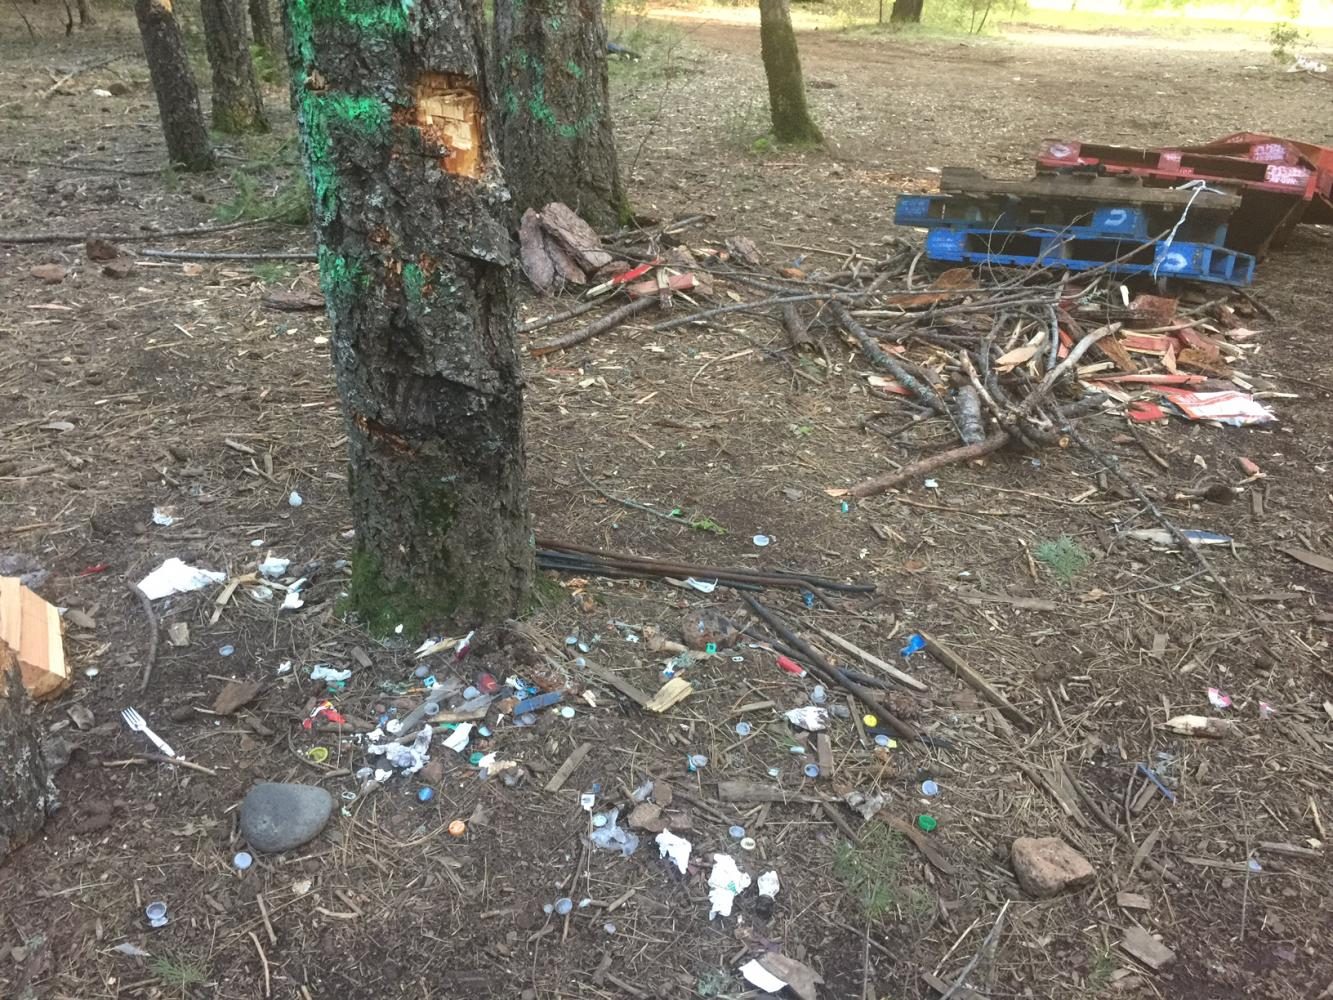 Fraternity+being+investigated+for+trashing+campsite